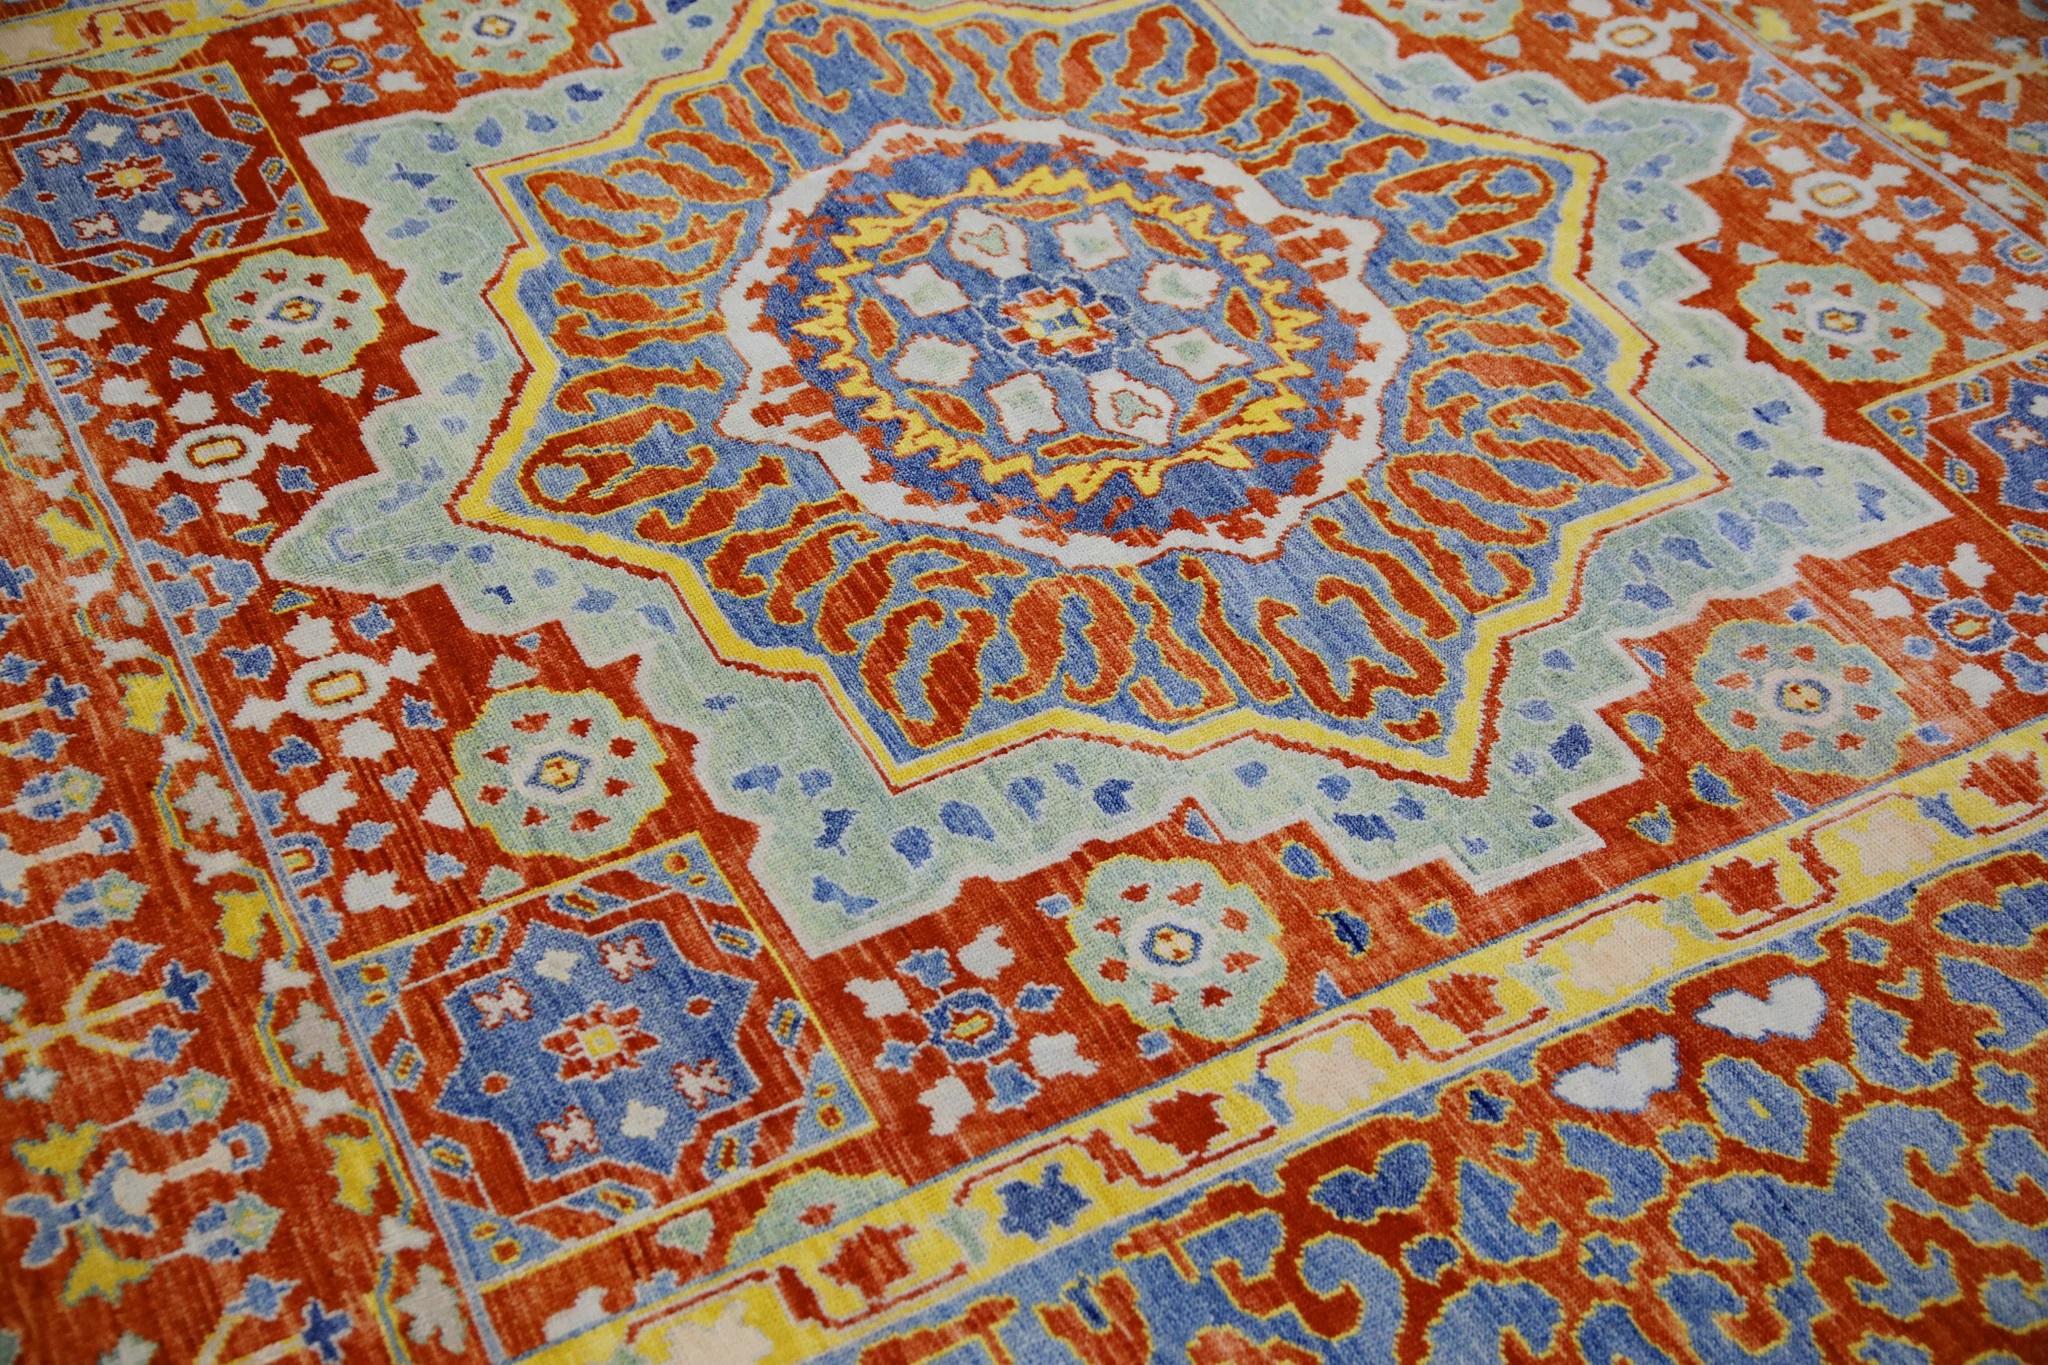 This Turkish fine woven oushak rug is a stunning piece of art that has been handwoven using traditional techniques by skilled artisans. The rug features intricate patterns and a soft color palette that is achieved through the use of natural